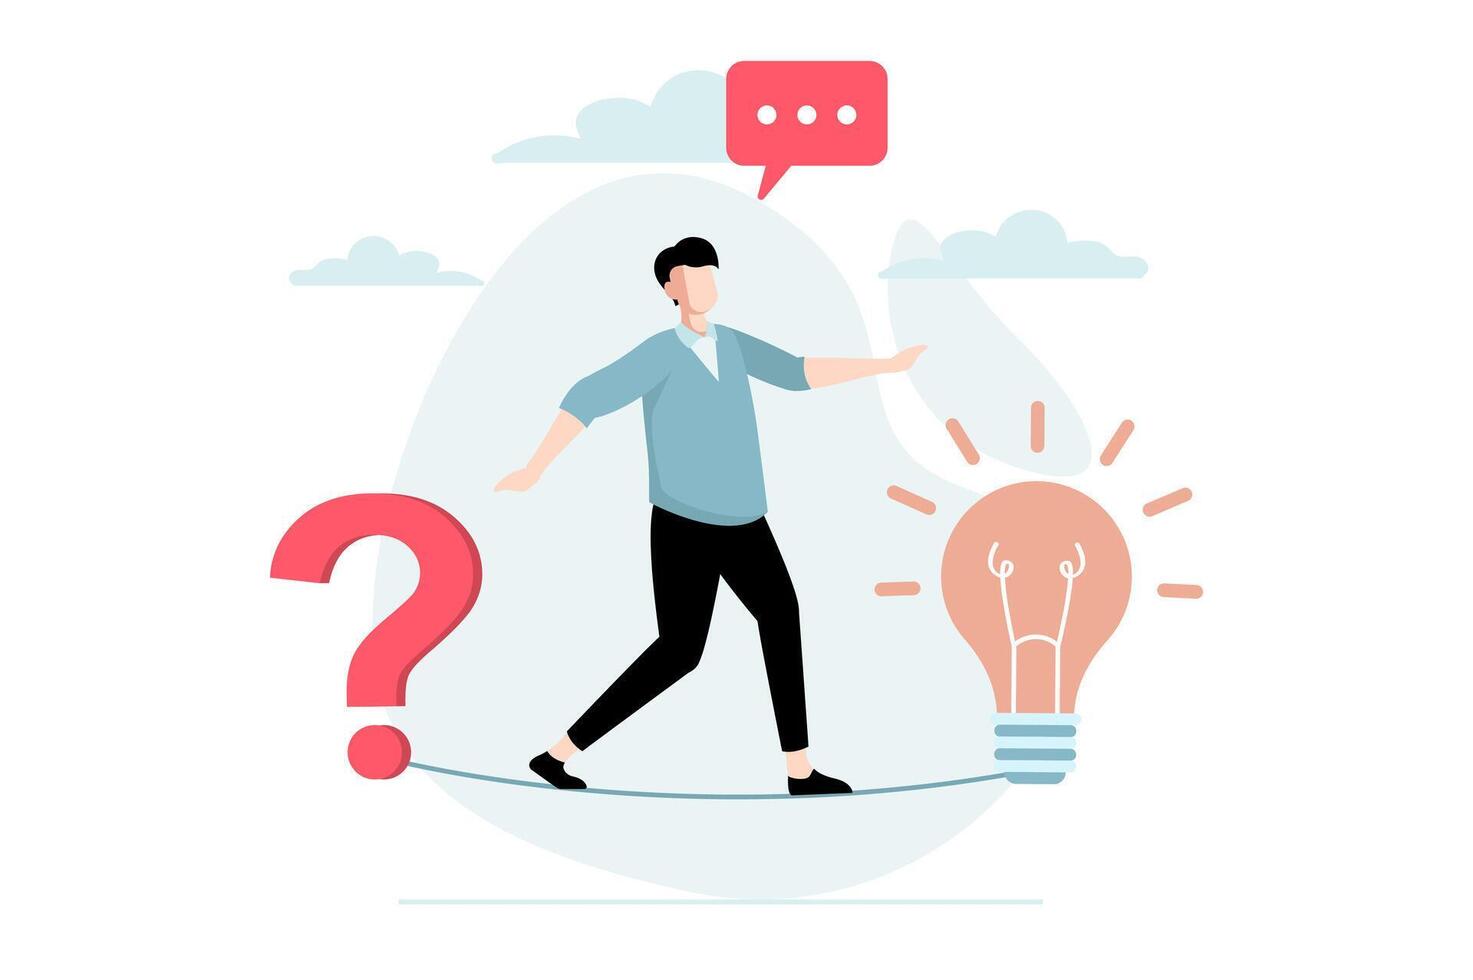 Finding solution concept with people scene in flat design. Man walks tight rope from question to new idea, brainstorms and thinking about problem. illustration with character situation for web vector